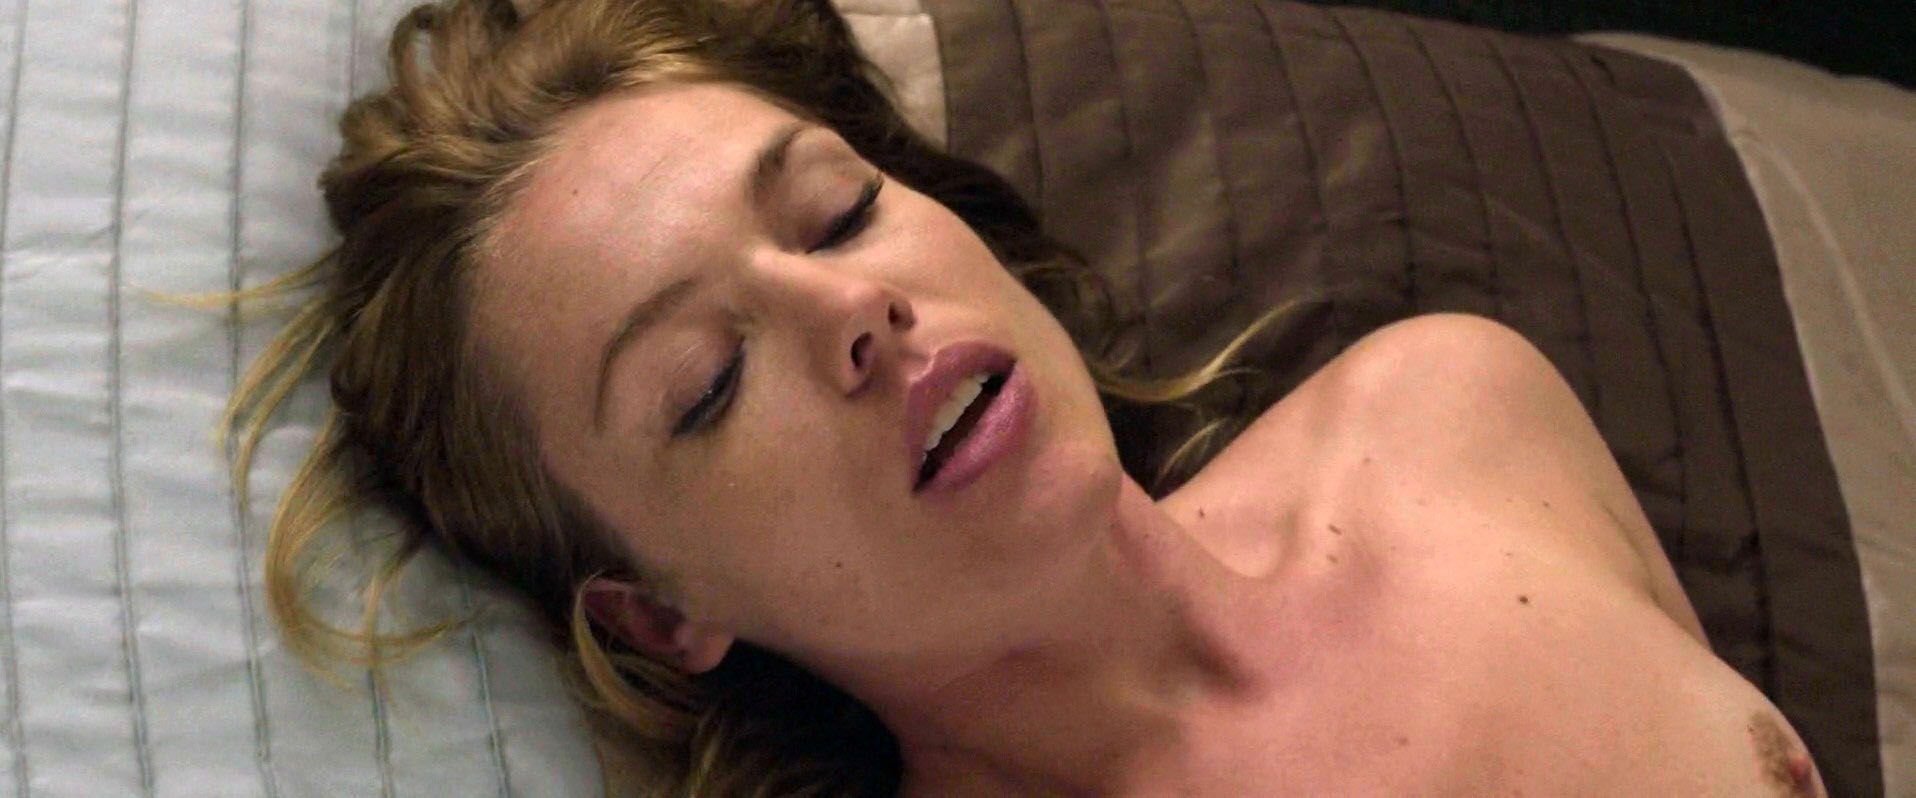 Agnes Bruckner Nude - There Is a New World Somewhere (2015) HD 1080p.